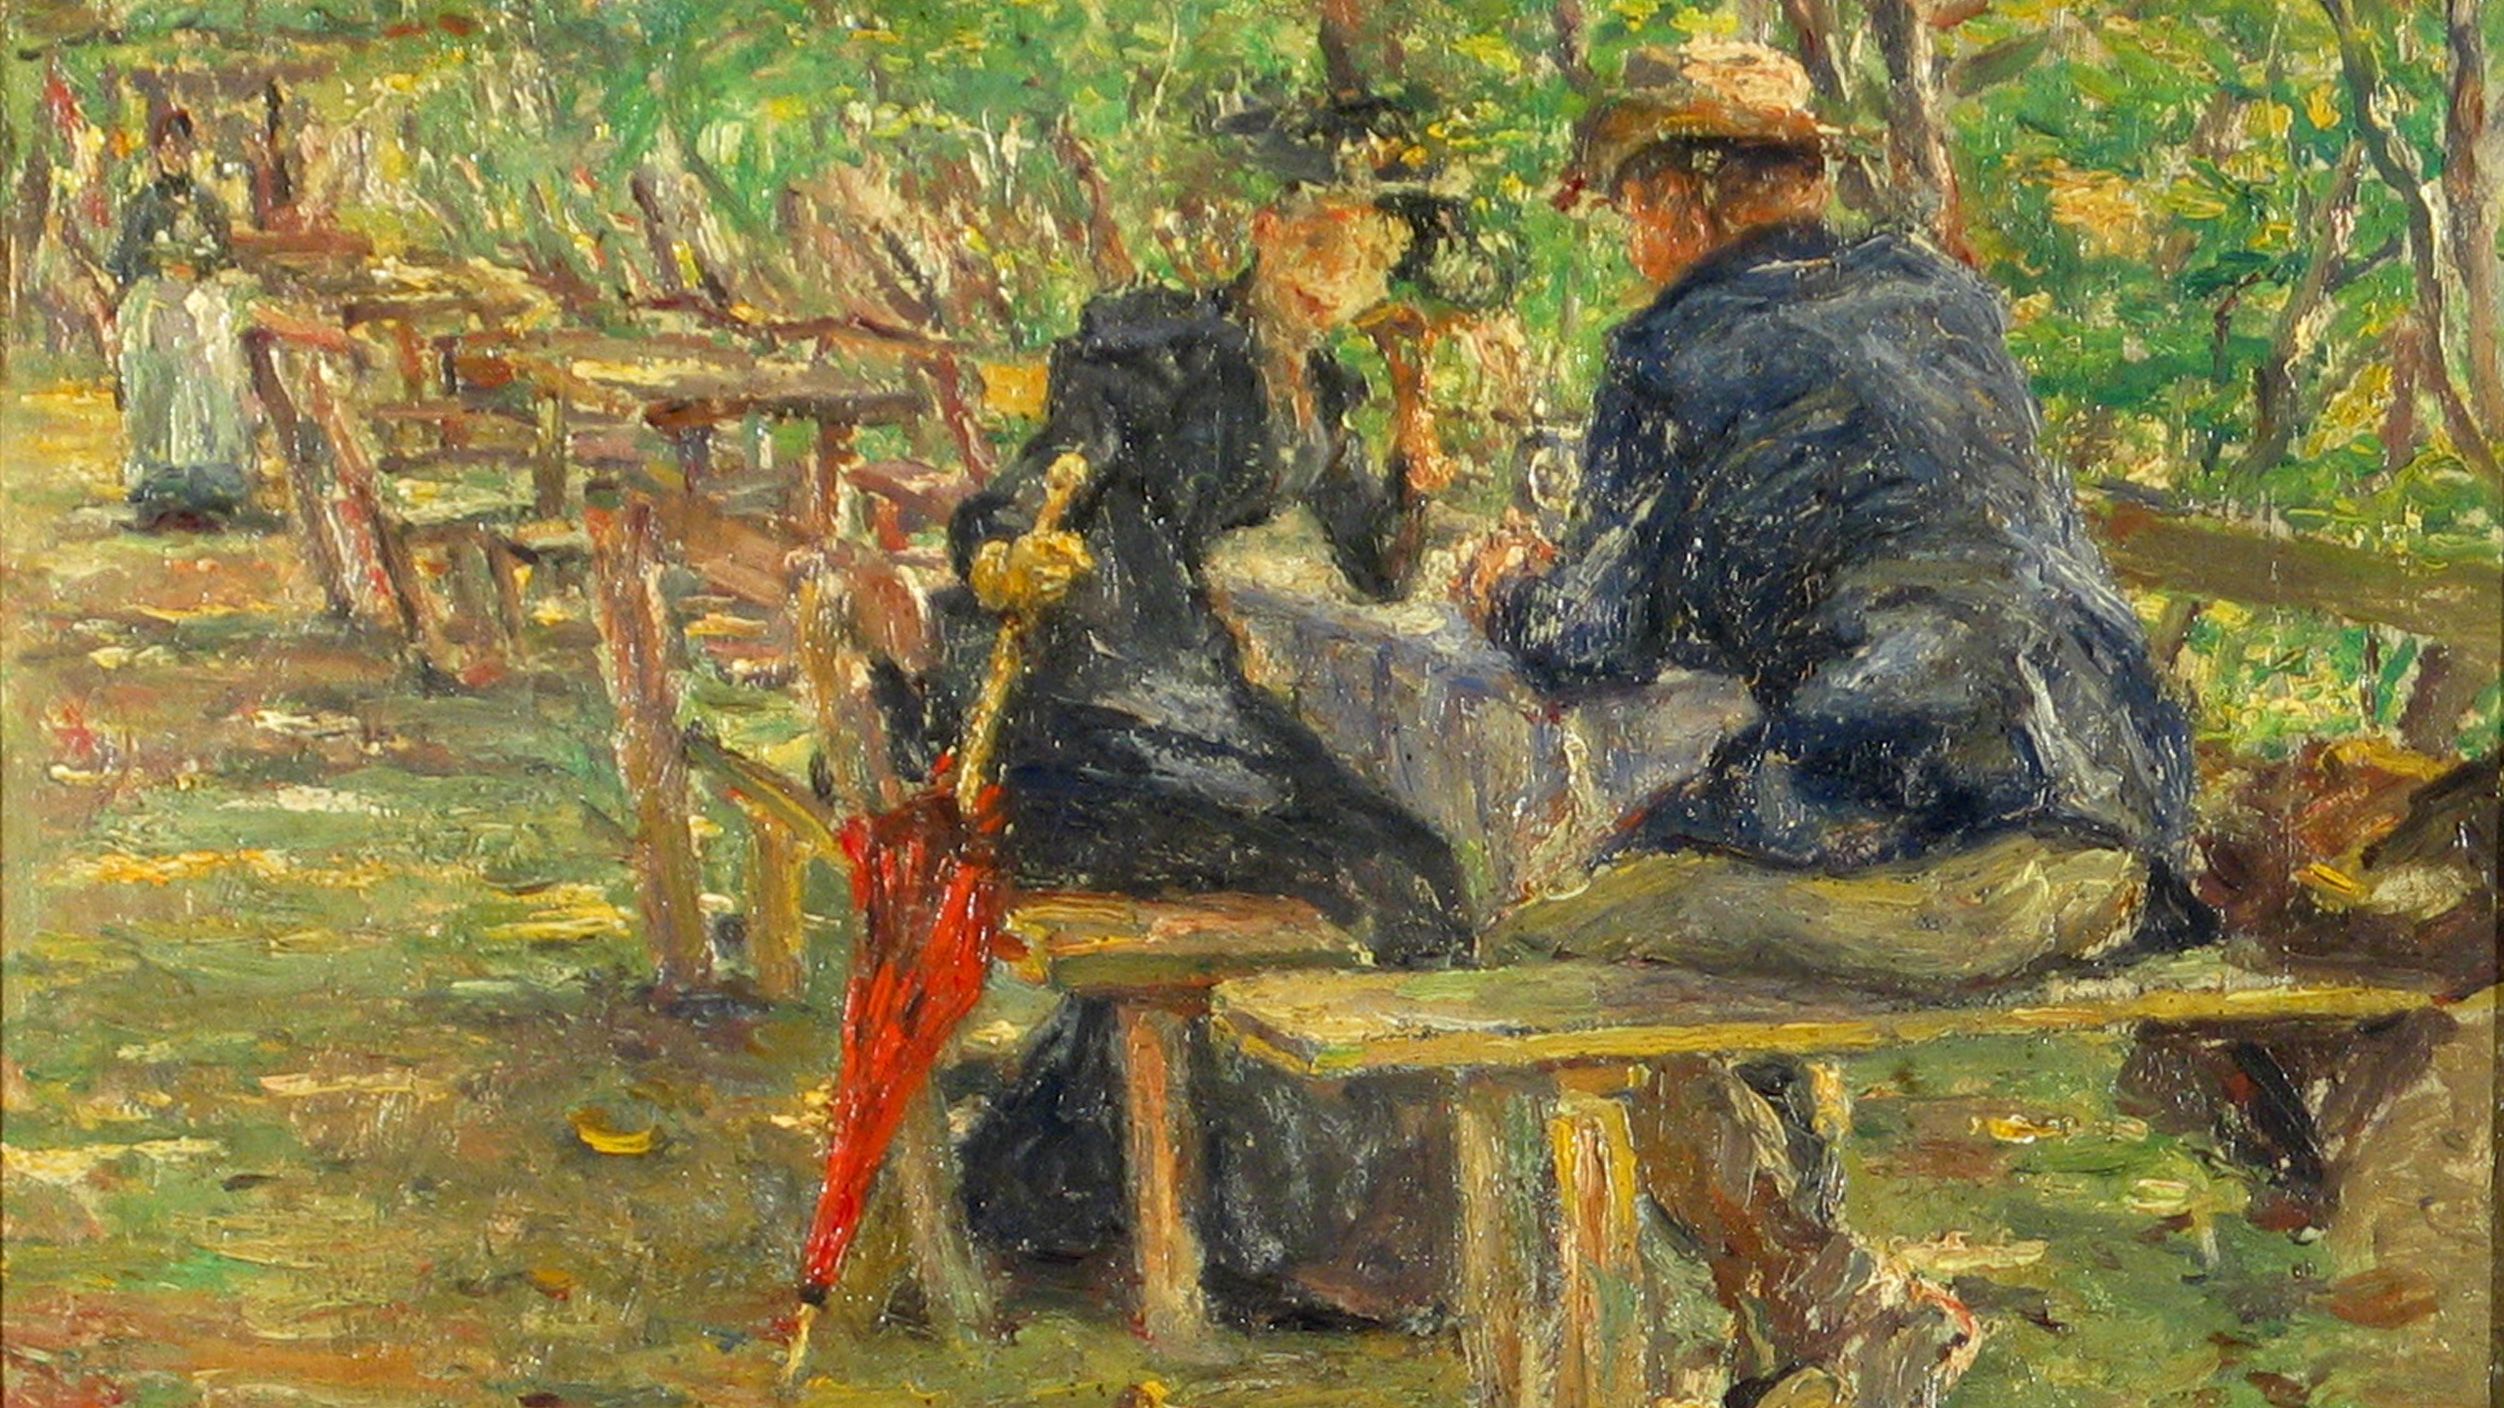 Painting by Adolf Hölzel, "In the beer garden of the old shooting range"